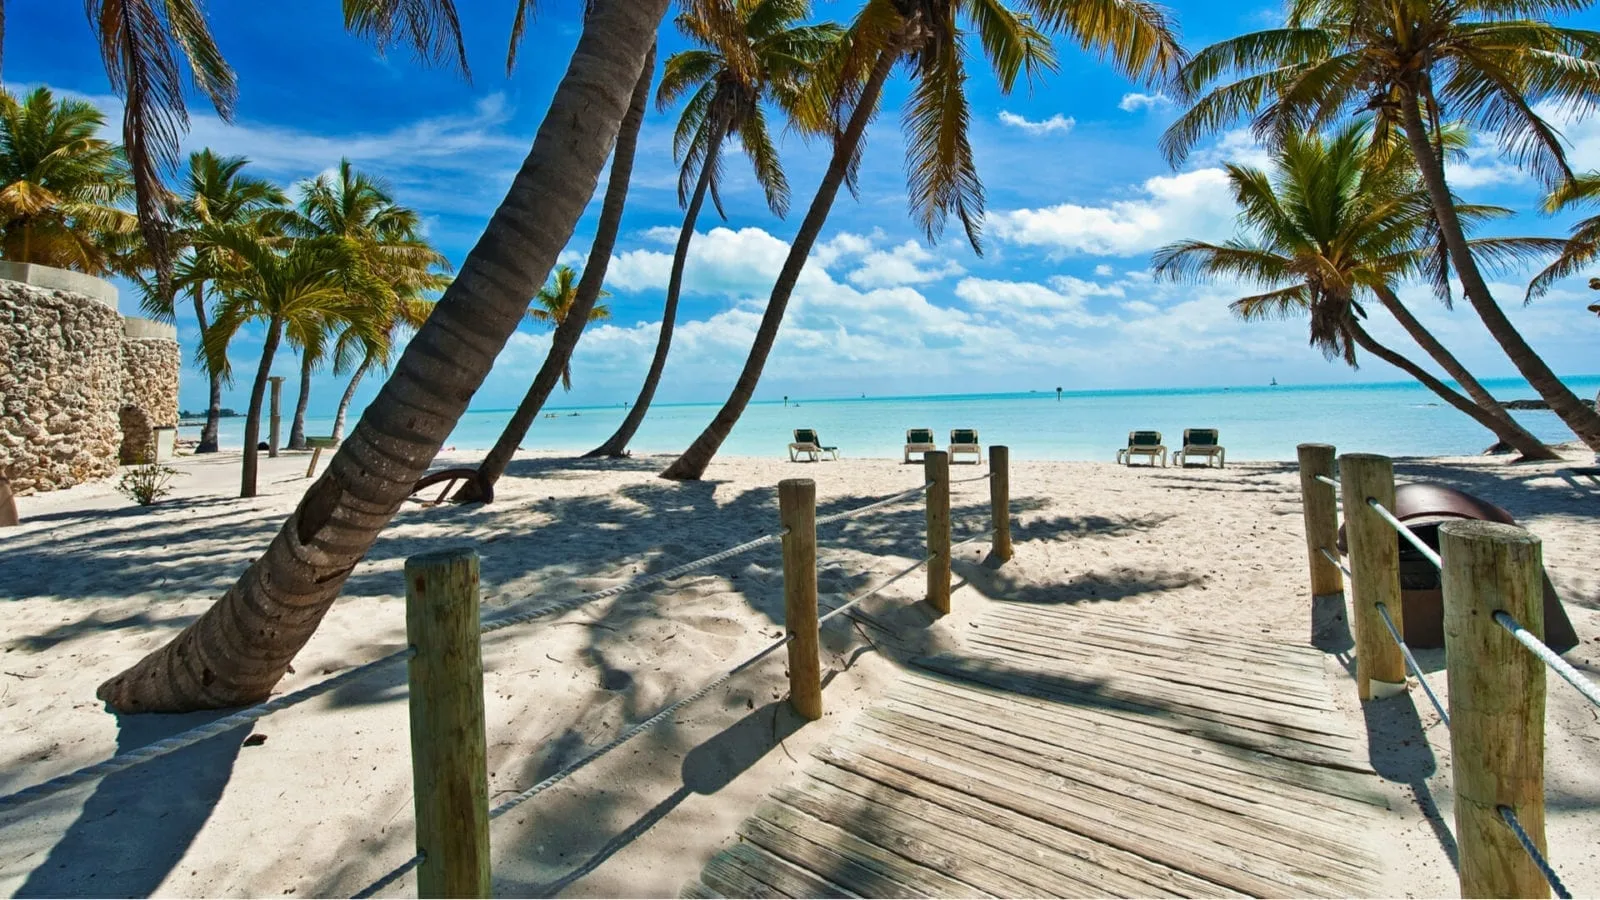 As an image for a piece on states with no property tax, photo of a beach in Florida with palm trees and a blue ocean